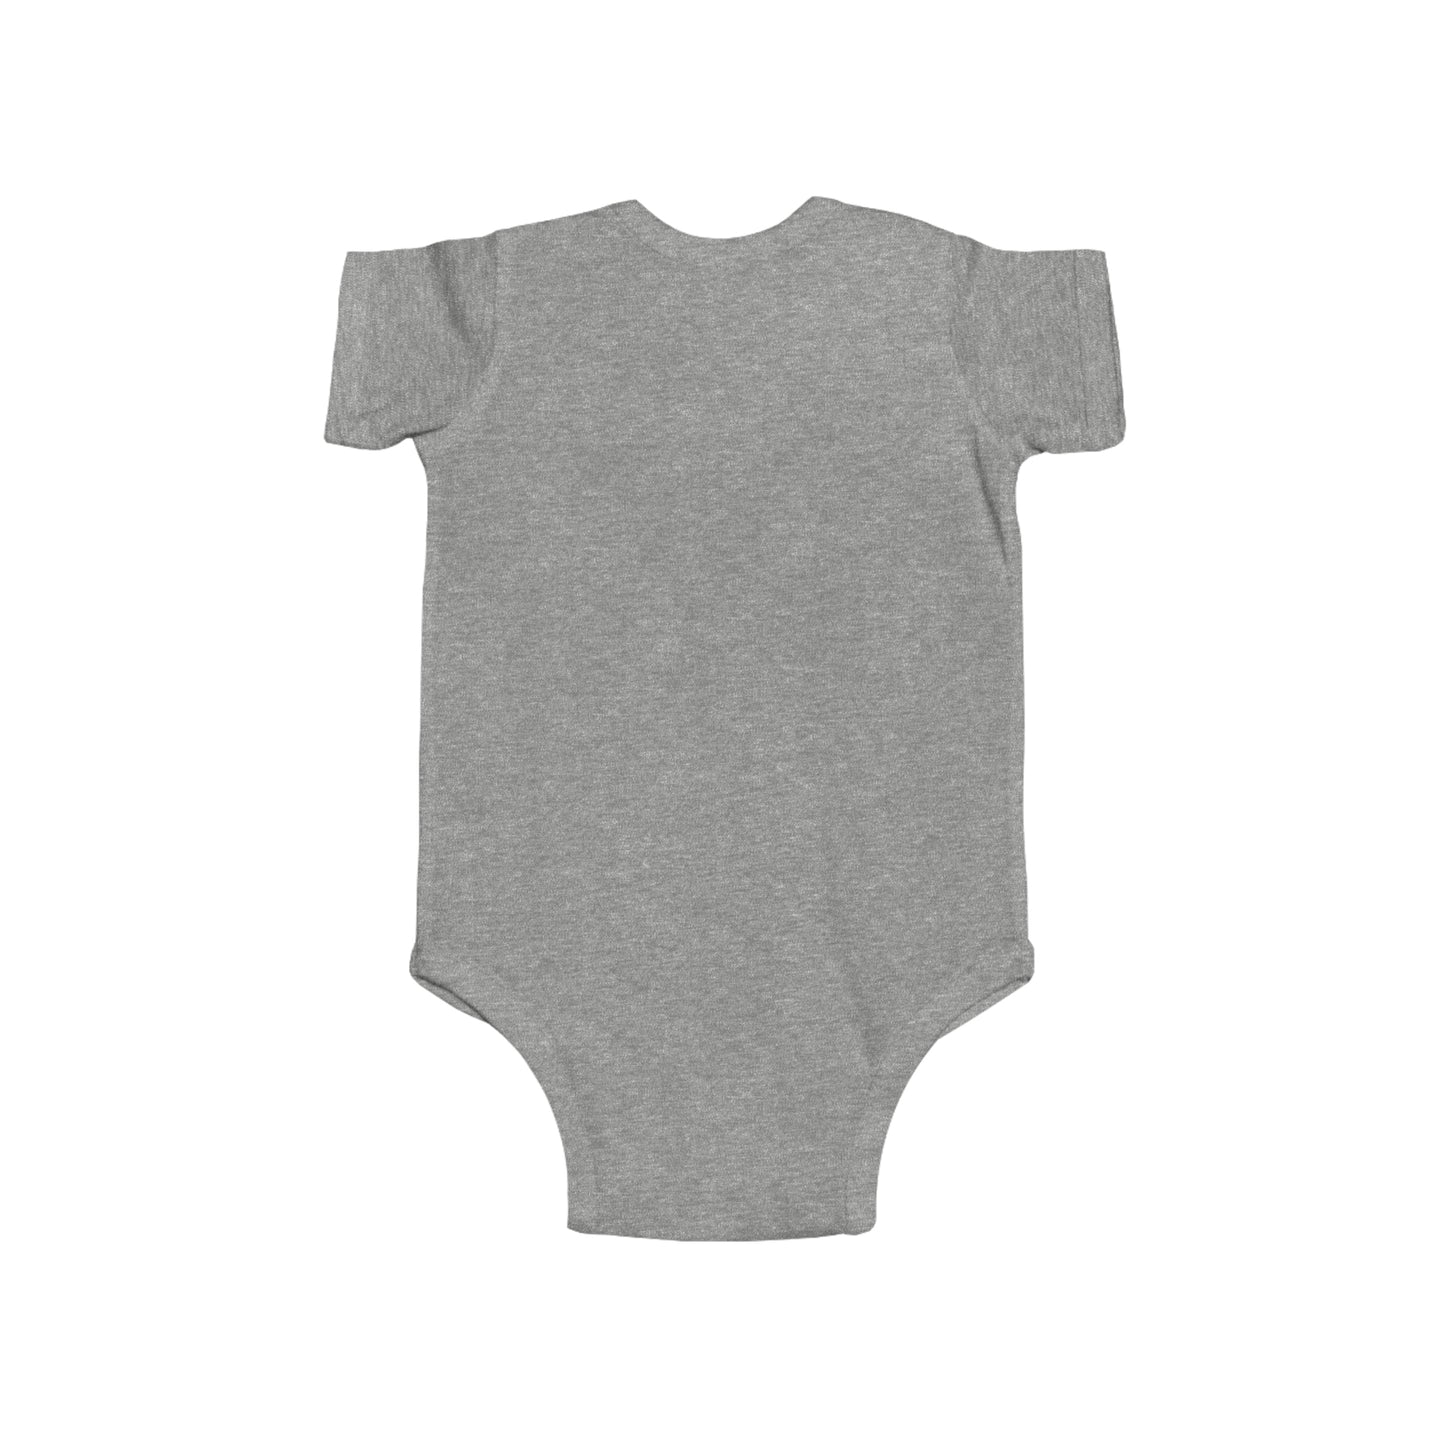 Dance, I Can Boogie, Retro Disco, Sports, Hobby, Interests, Dancing, Words- Baby, Infant, Toddler, Soft Cotton, Onesie